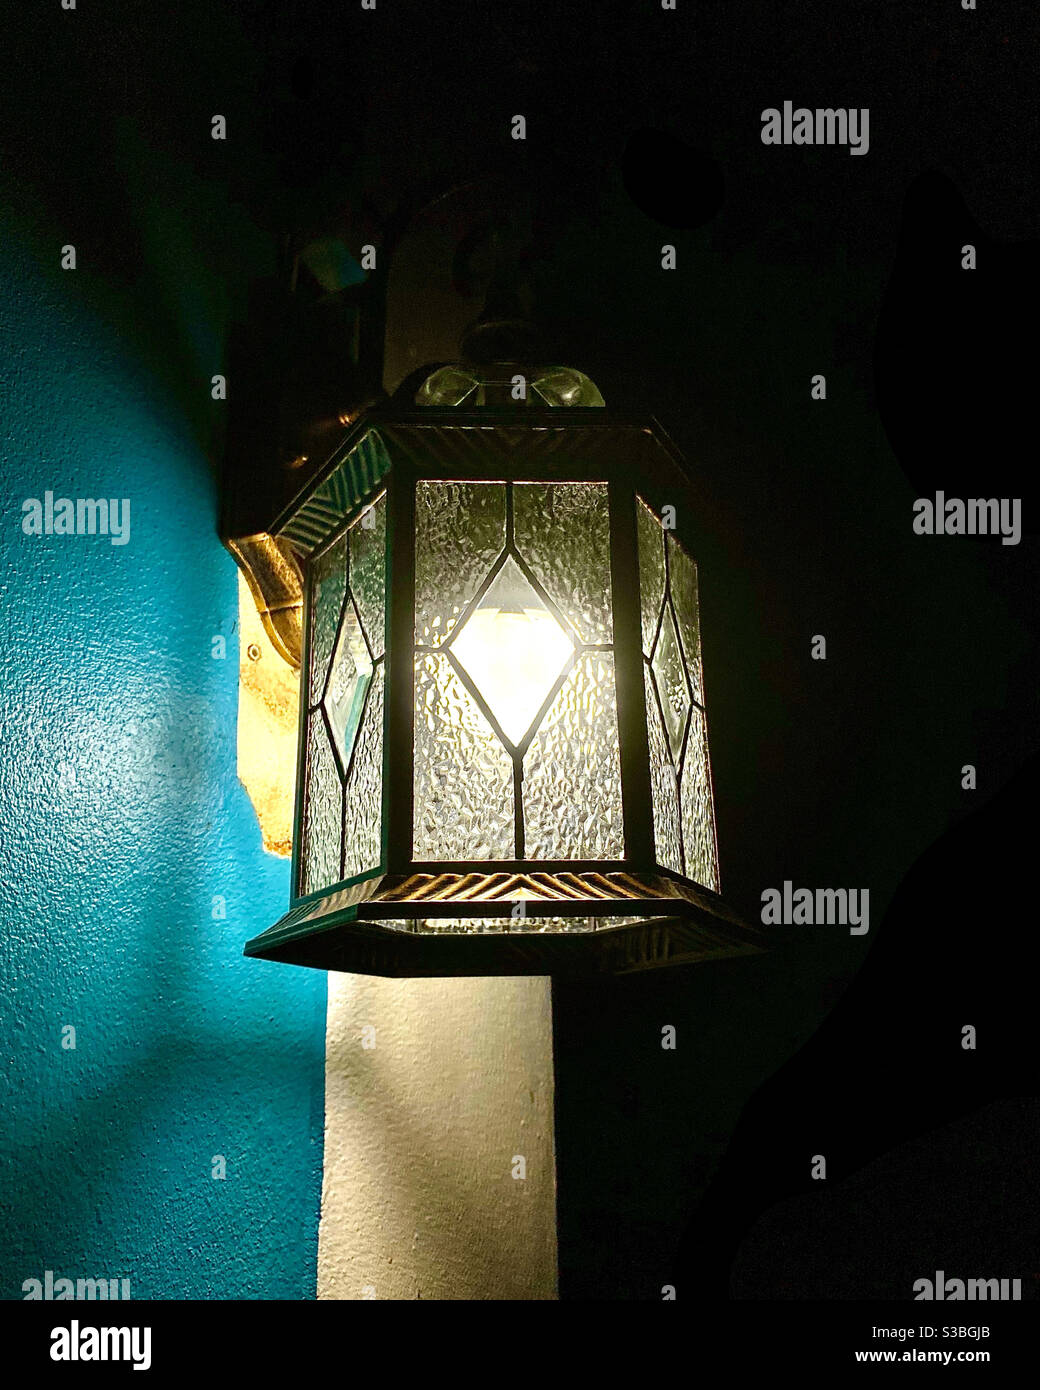 A lamp in the night Stock Photo